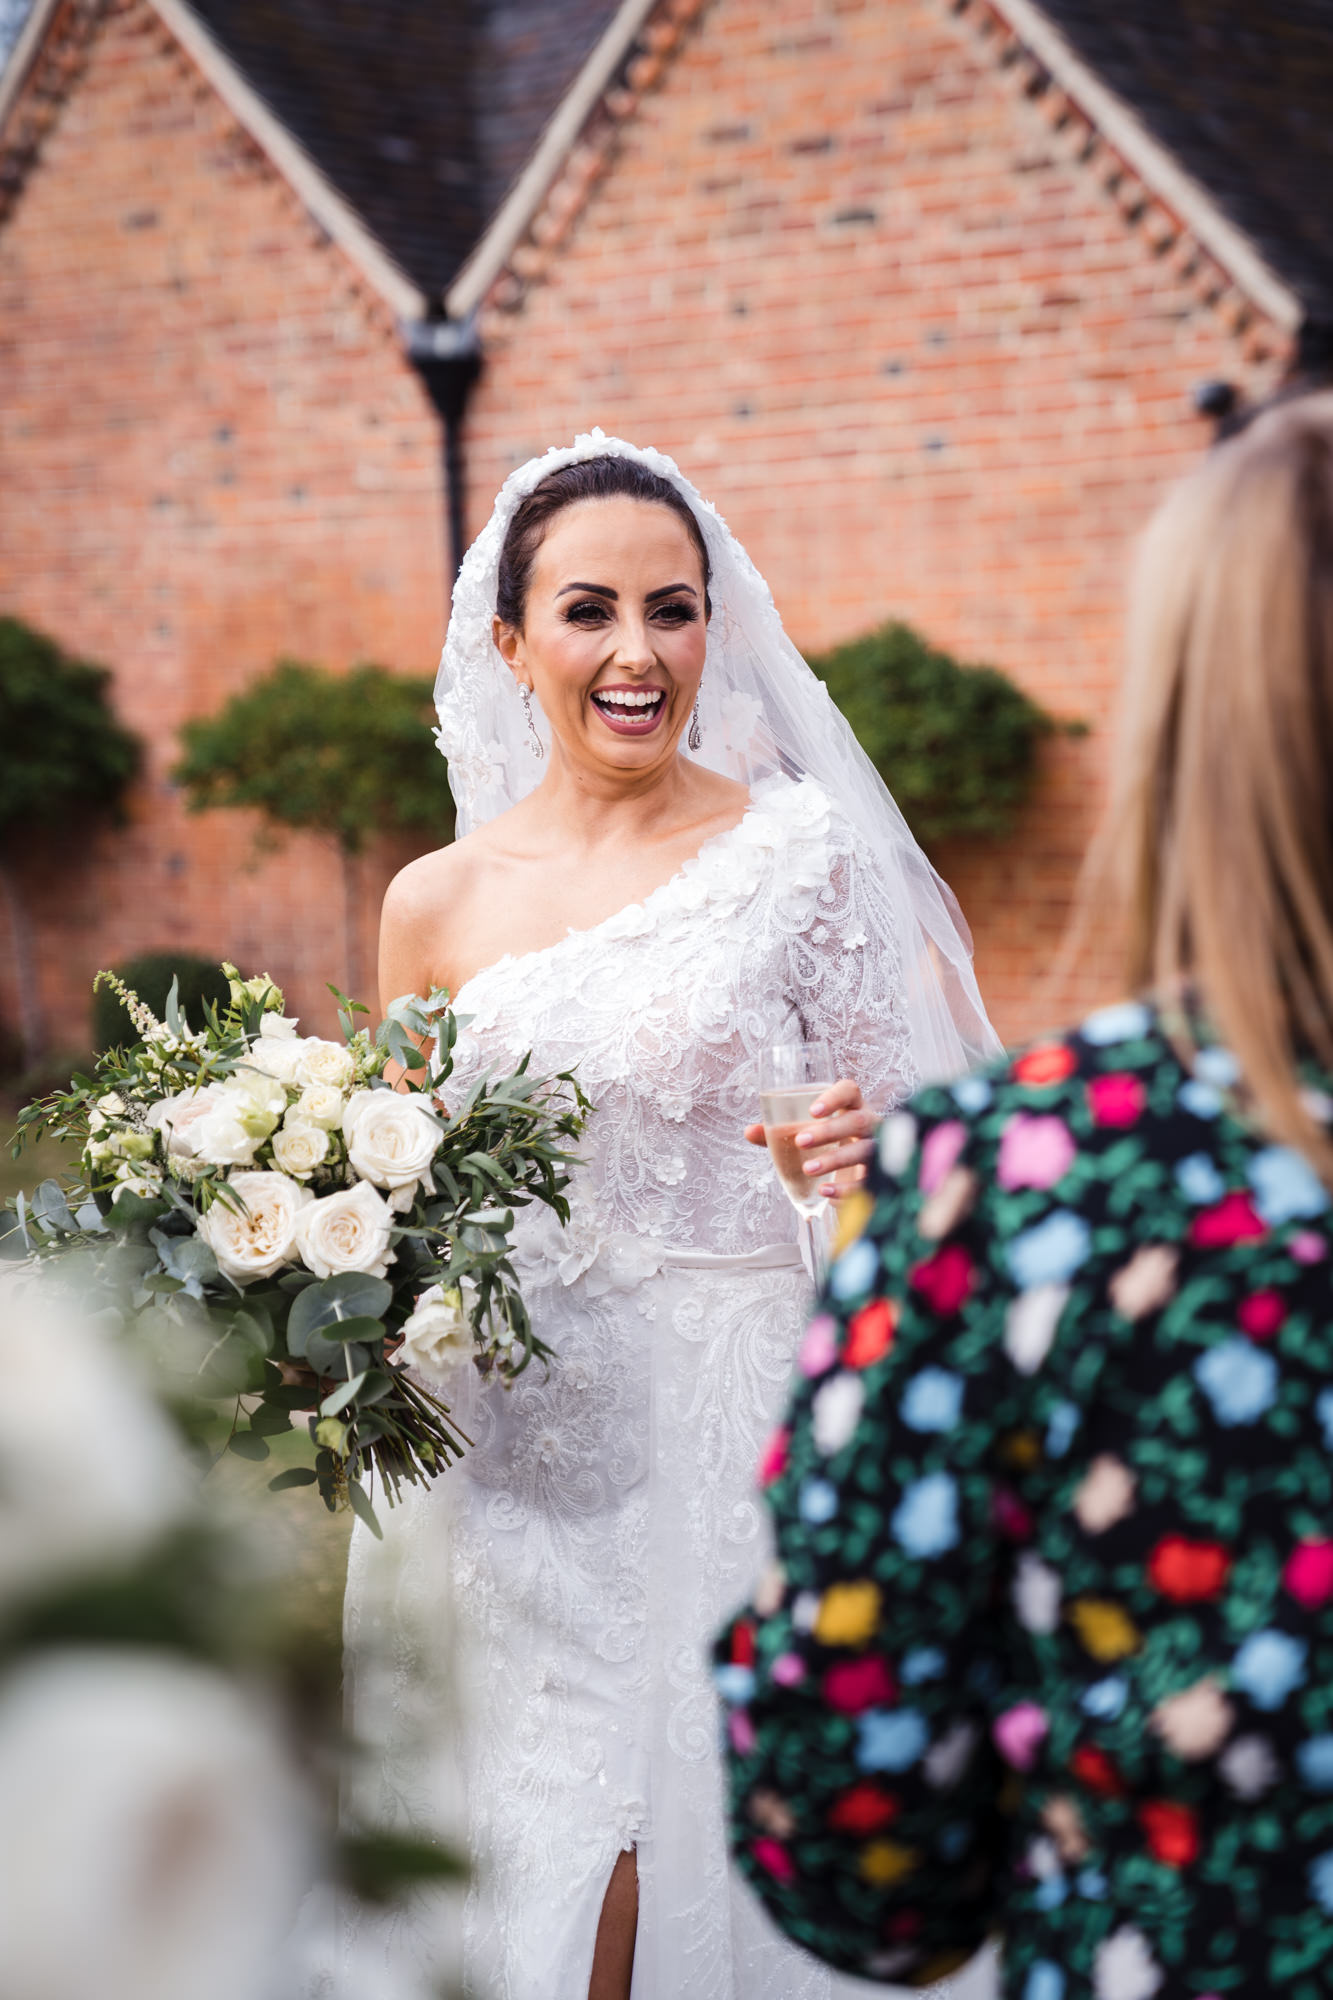 bride laughing at her wedding reception with guests holding her floral bouquet and a glass of champagne